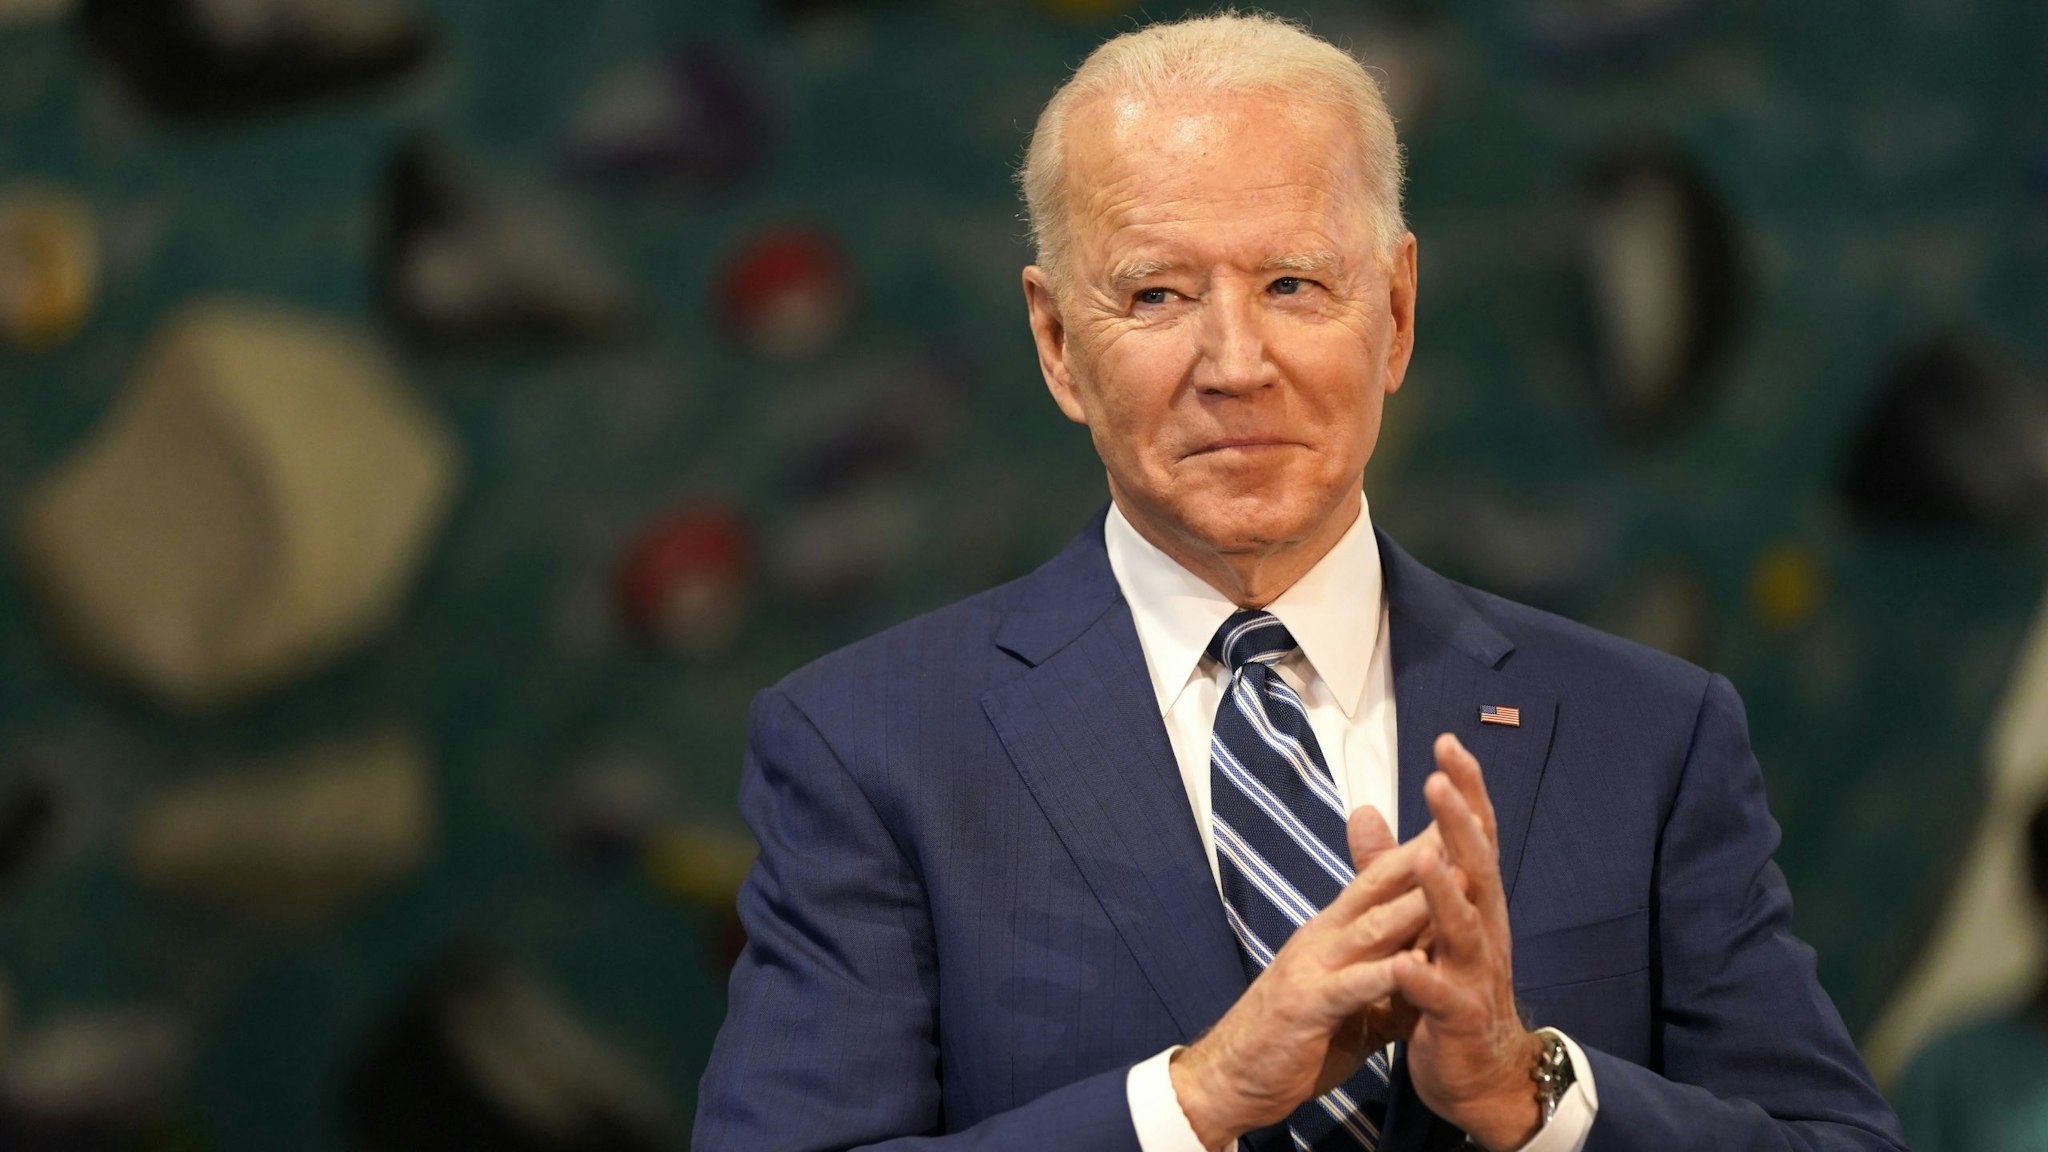 U.S. President Joe Biden applauds while Ralph Northam, governor of Virginia, not pictured, speaks at Sportrock Climbing Center during an event in Alexandria, Virginia, U.S., on Friday, May 28, 2021. Biden this week said he ordered the U.S. intelligence community to "redouble" its effort to determine where the coronavirus came from, after conflicting conclusions about whether its origins are natural or a lab accident.